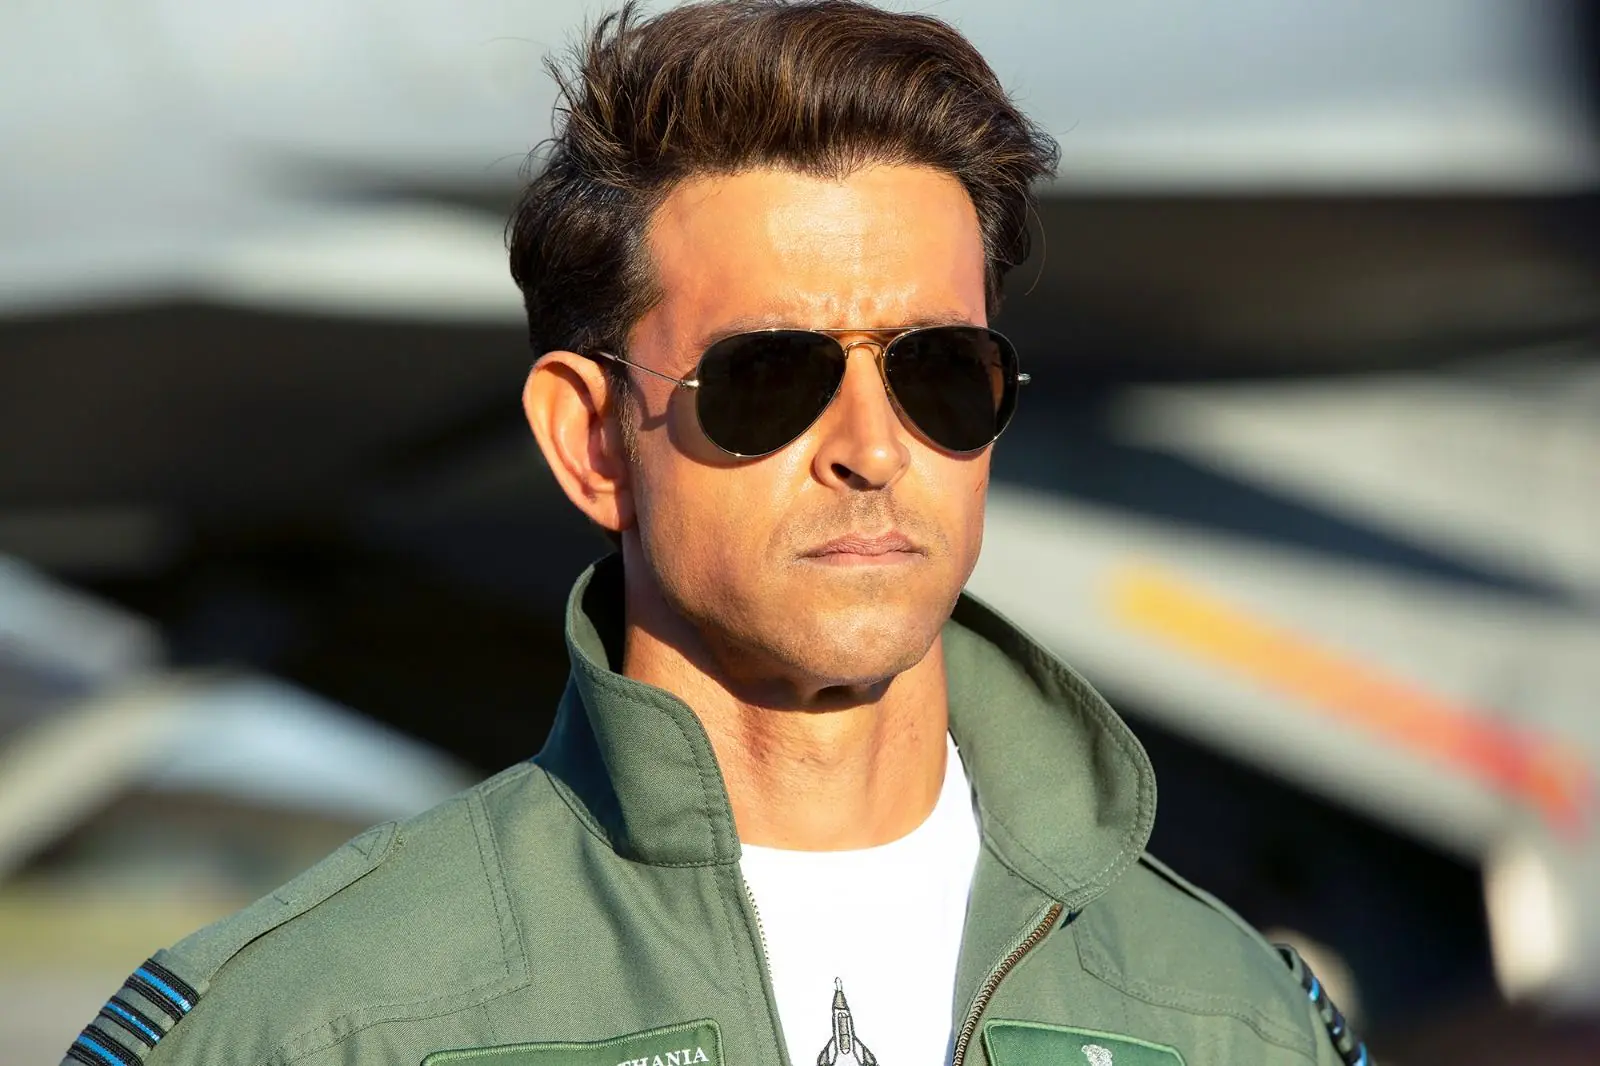 Hrithik roshan shares behind-the-scenes glimpses of his fighter character patty